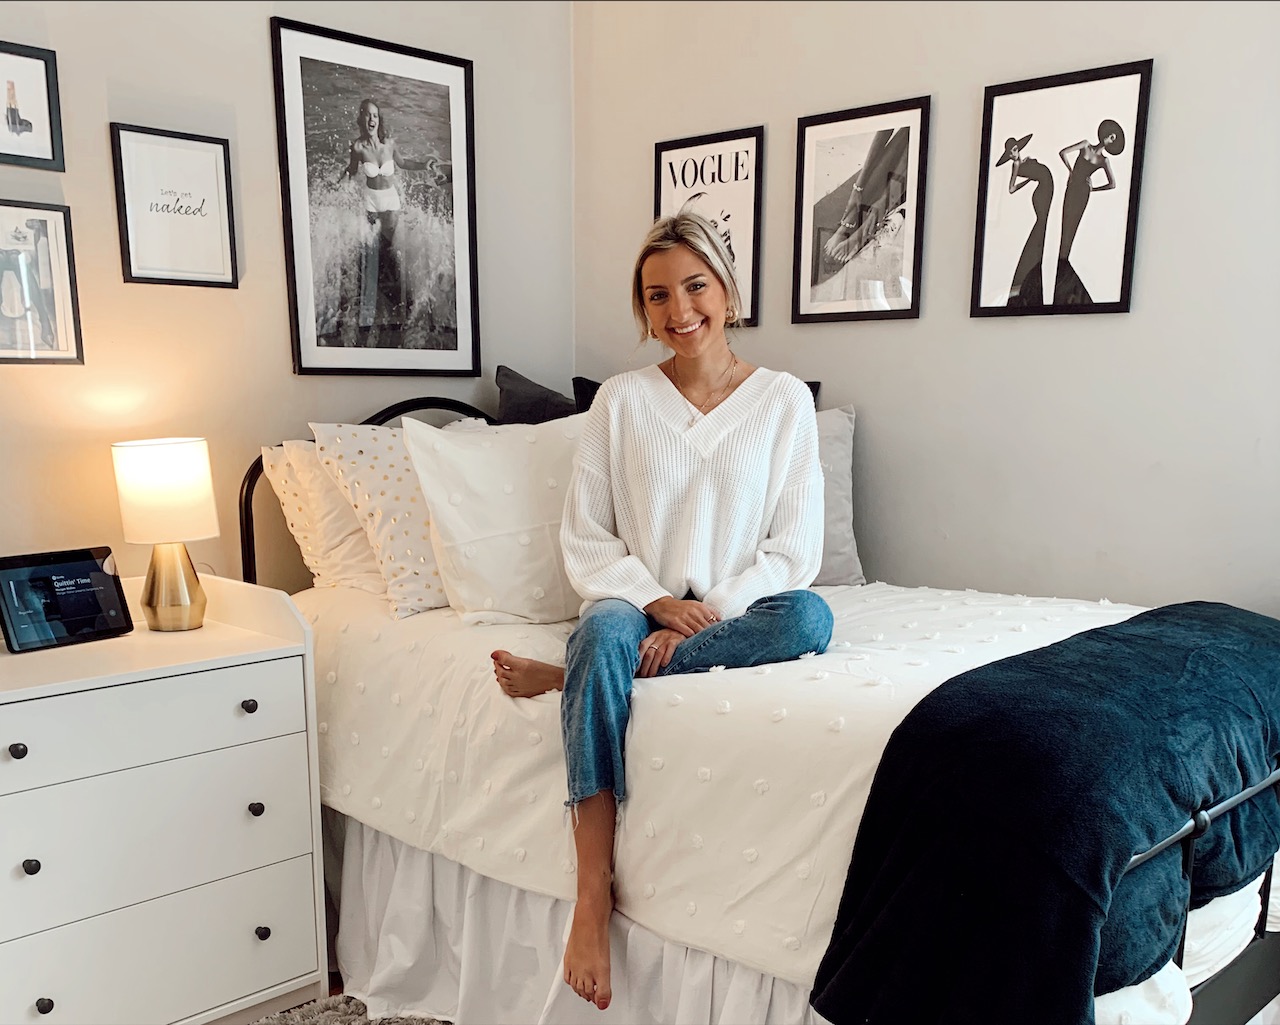 Extreme Bedroom Makeover With IKEA